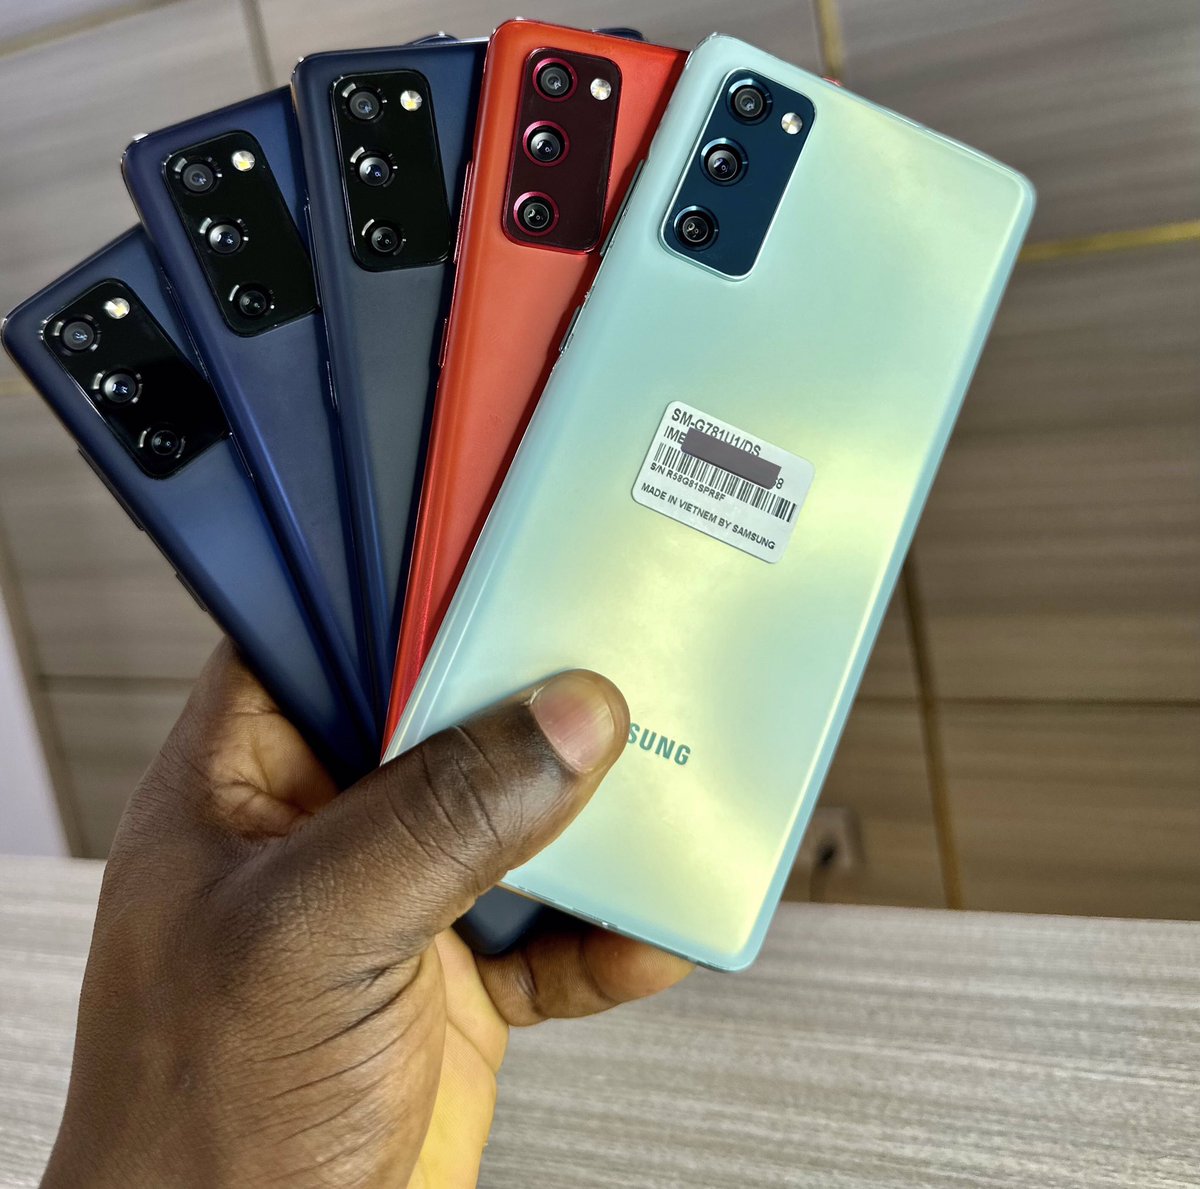 #OneTime Discount Deal🔥
🇺🇸Premium Used
🅢 Samsung Galaxy S20 FE 5G
6gb Ram | 128gb Storage

Price Now: ₦177,000 Only

📍Who’s in?

DM Open📩

To Place Order & Delivery ⤵
DM/Call/Whatsapp +2348132727945

Kindly RT❤️
Thanks🙏🏾

#GeekTech